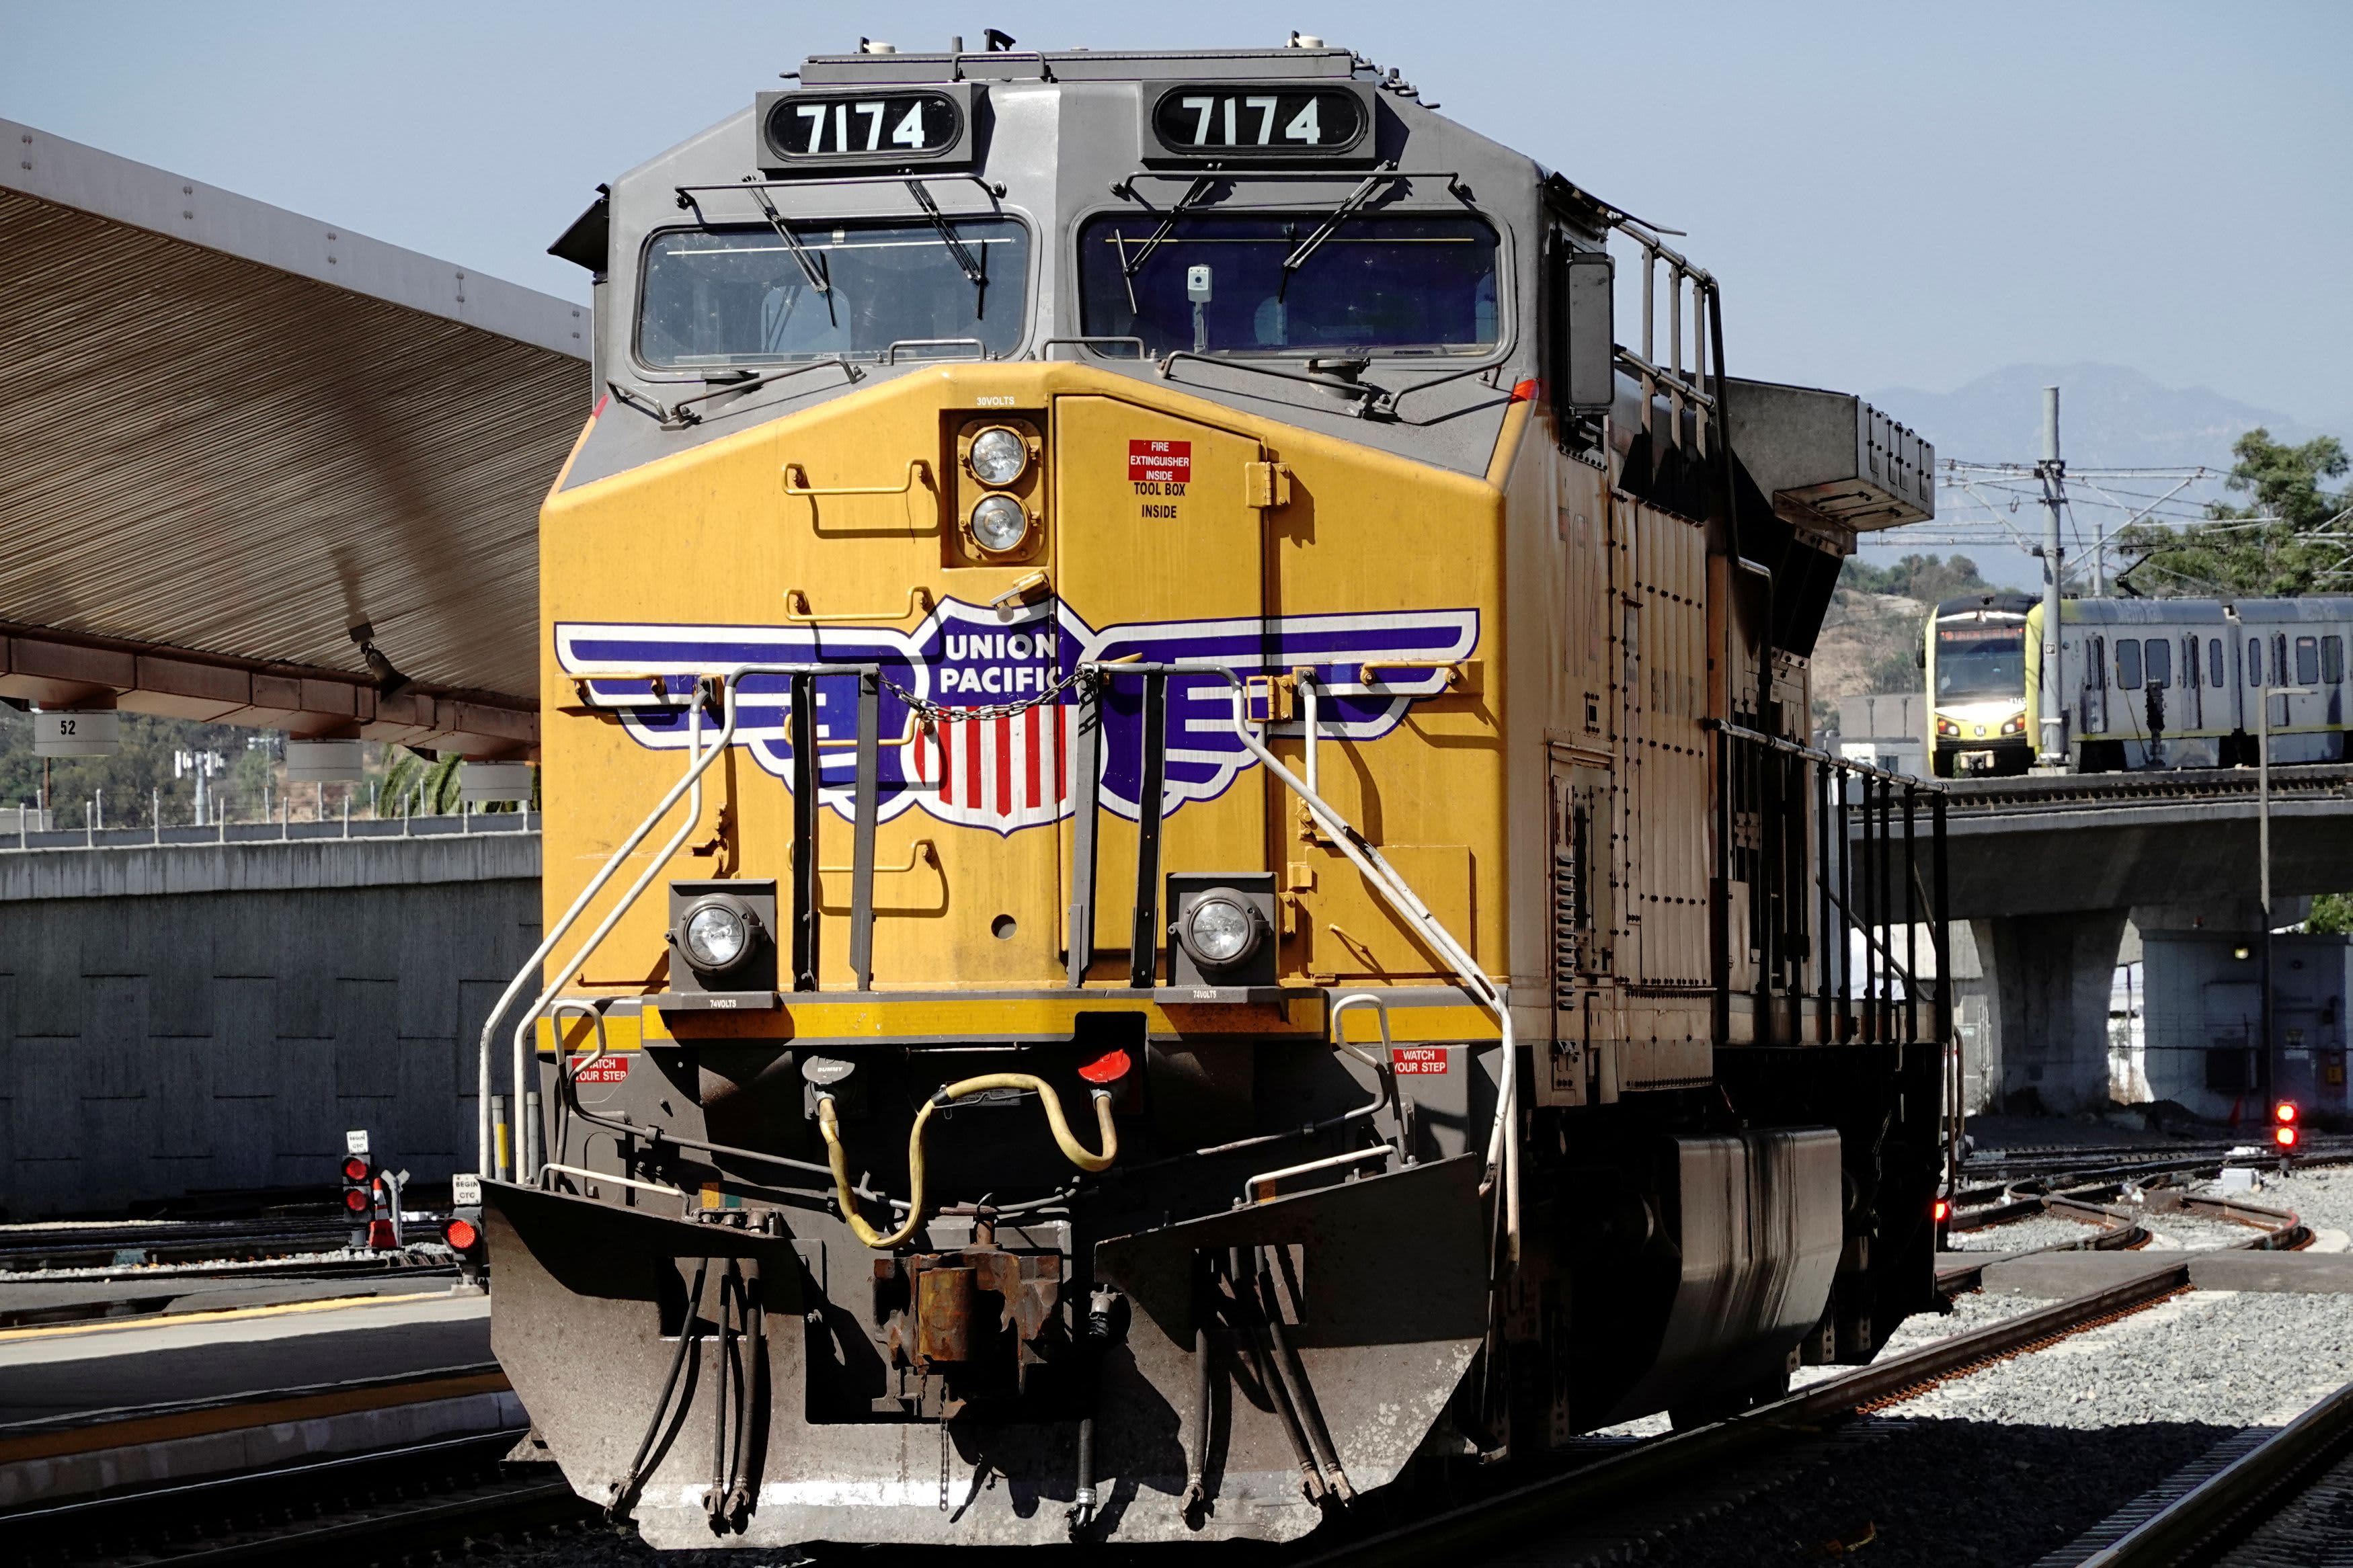 Union Pacific CEO steps down as hedge fund pushes for change